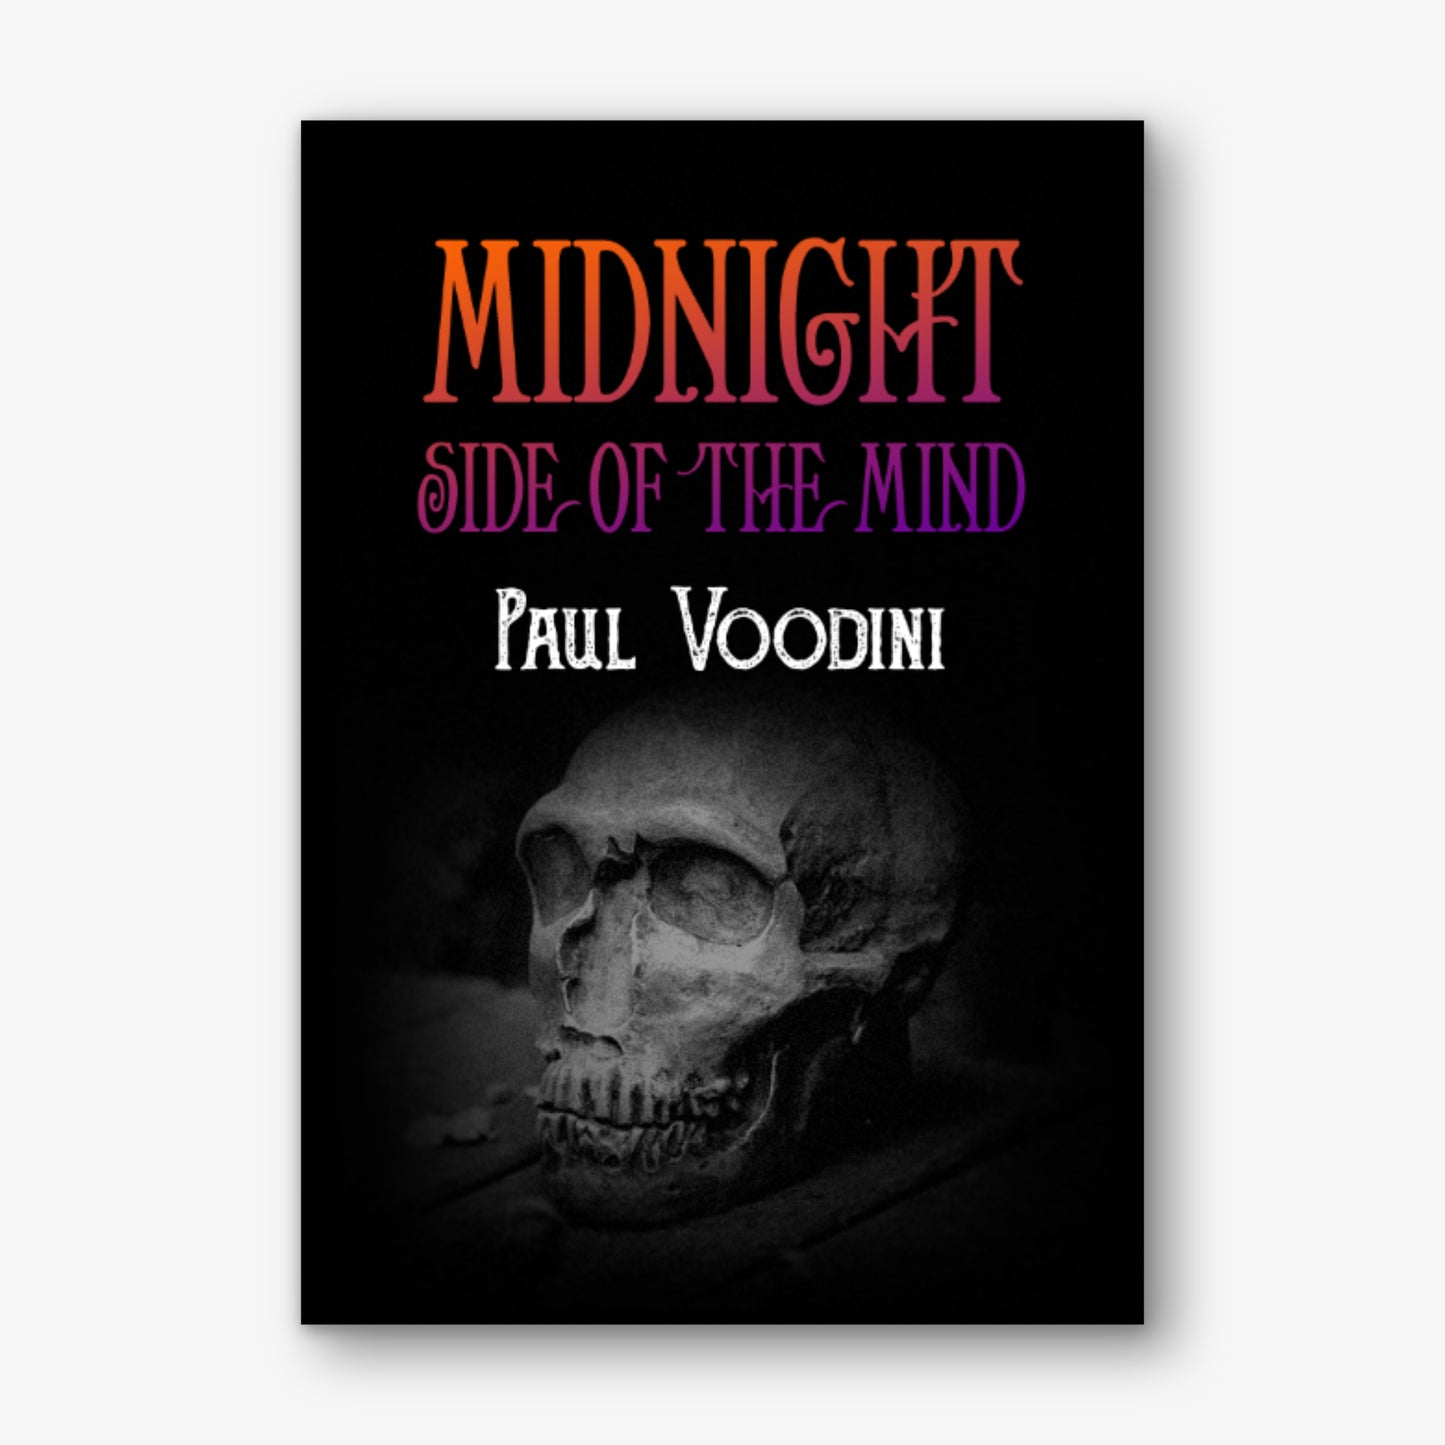 Midnight Side of the Mind by Paul Voodini